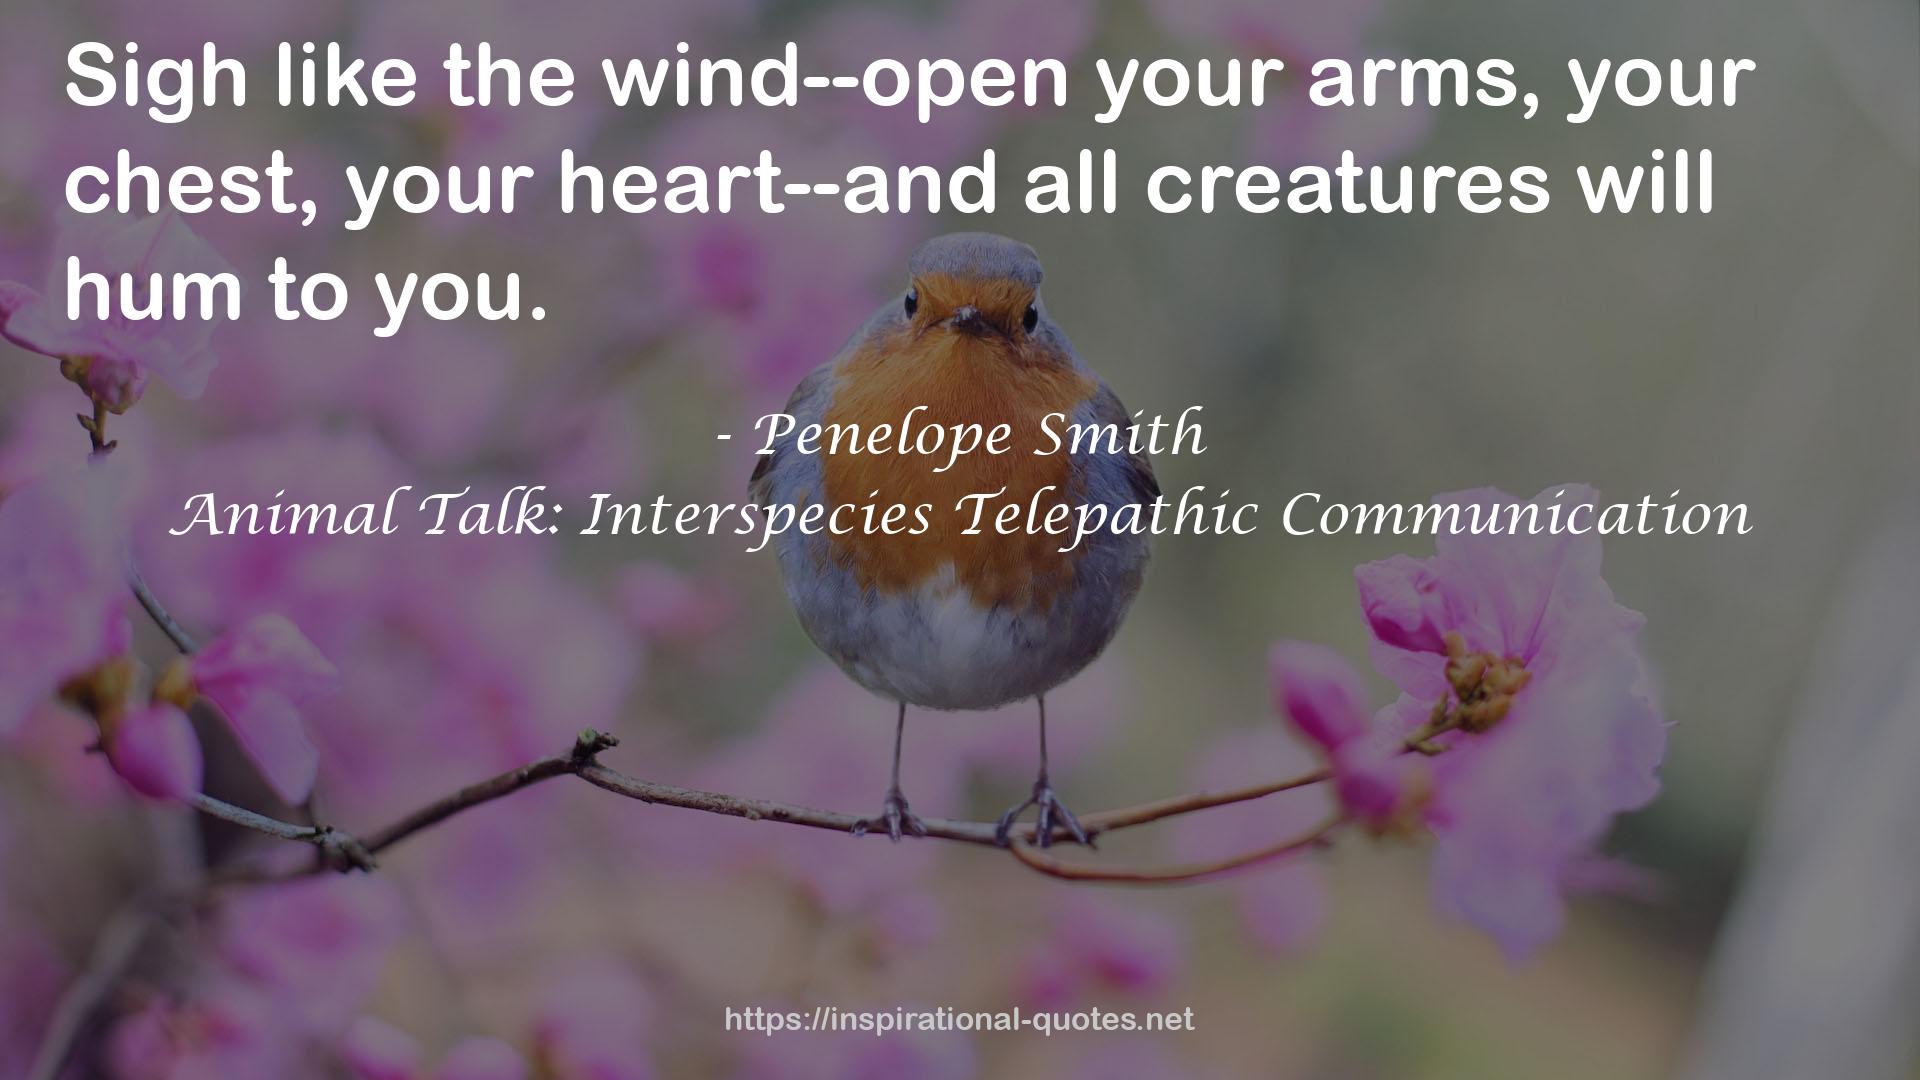 Penelope Smith QUOTES